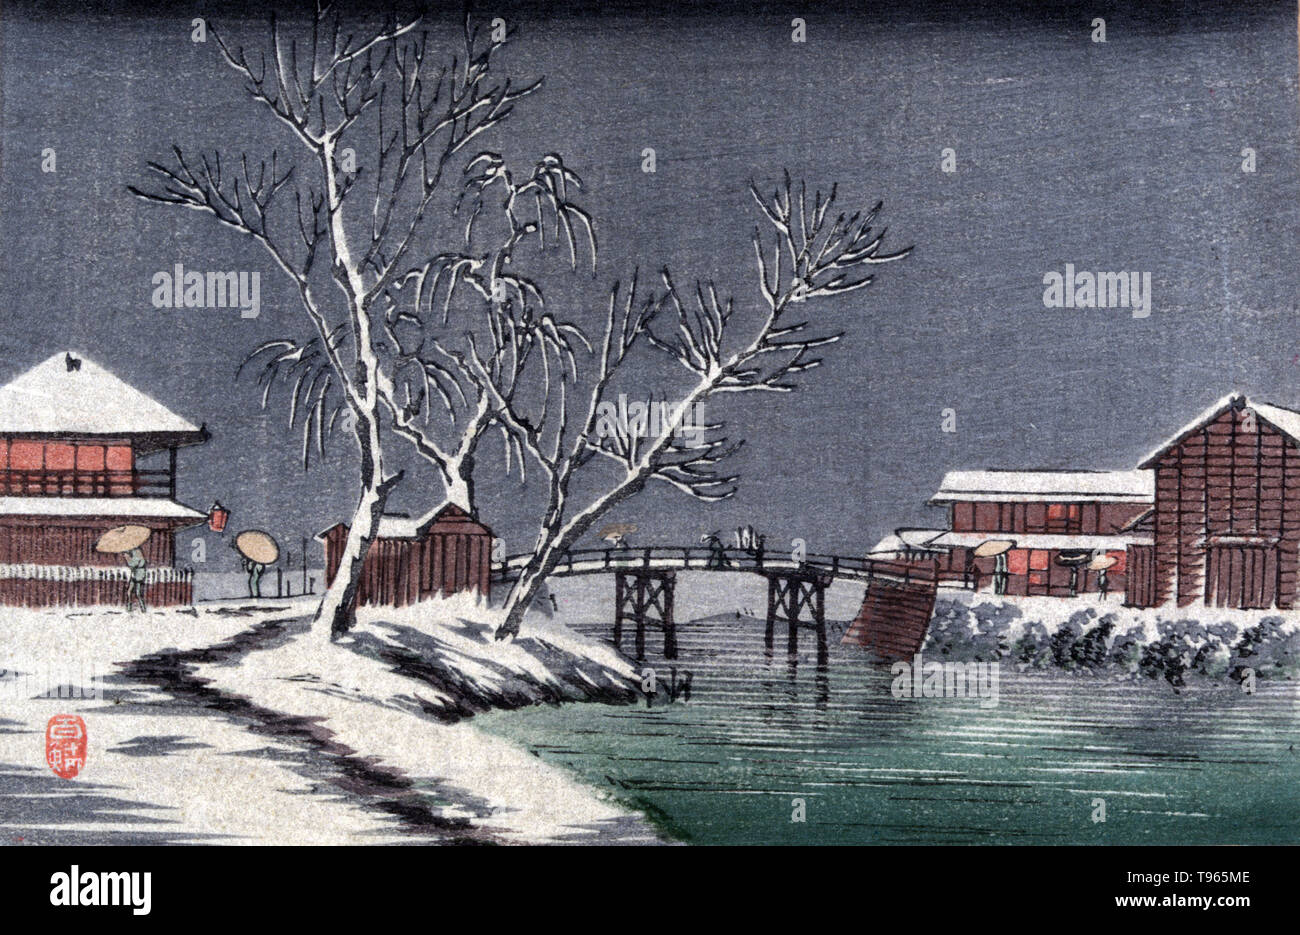 Yuki no horiwari. Canal in snow. Winter landscape with buildings and a small bridge across a canal. Ukiyo-e (picture of the floating world) is a genre of Japanese art which flourished from the 17th through 19th centuries. Ukiyo-e was central to forming the West's perception of Japanese art in the late 19th century. The landscape genre has come to dominate Western perceptions of ukiyo-e. The Japanese landscape differed from the Western tradition in that it relied more heavily on imagination, composition, and atmosphere than on strict observance of nature. No artist credited, circa 1900-20. Stock Photo